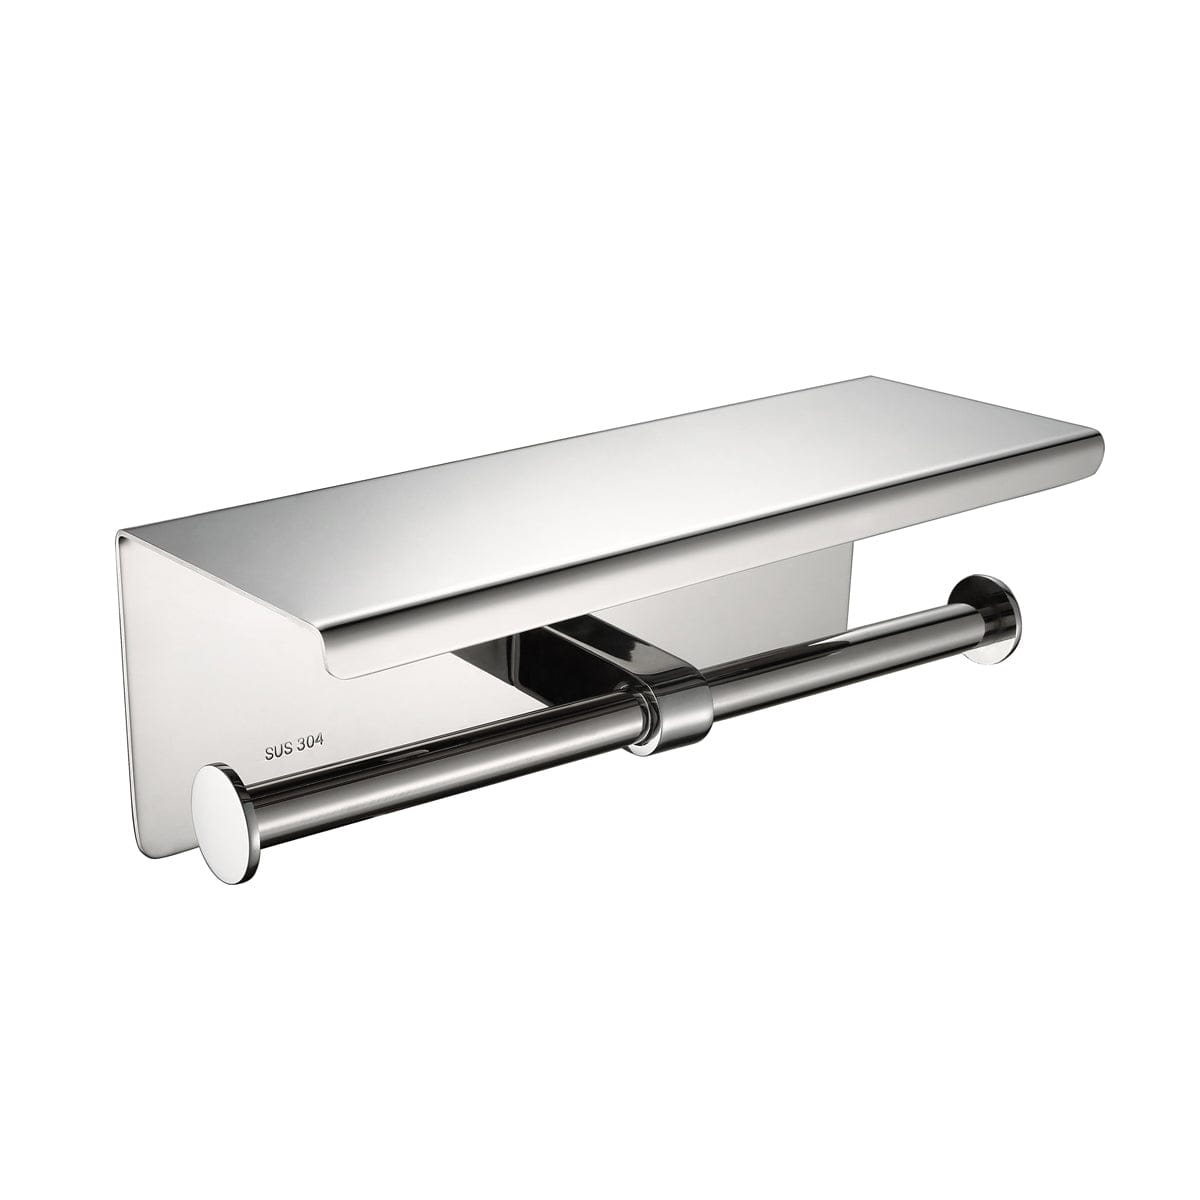 Shop Bathroom Stainless Steel Chrome Double Toilet Paper Holder - L8805 | Buy Online at Supply Master Accra, Ghana Bathroom Accessories Buy Tools hardware Building materials